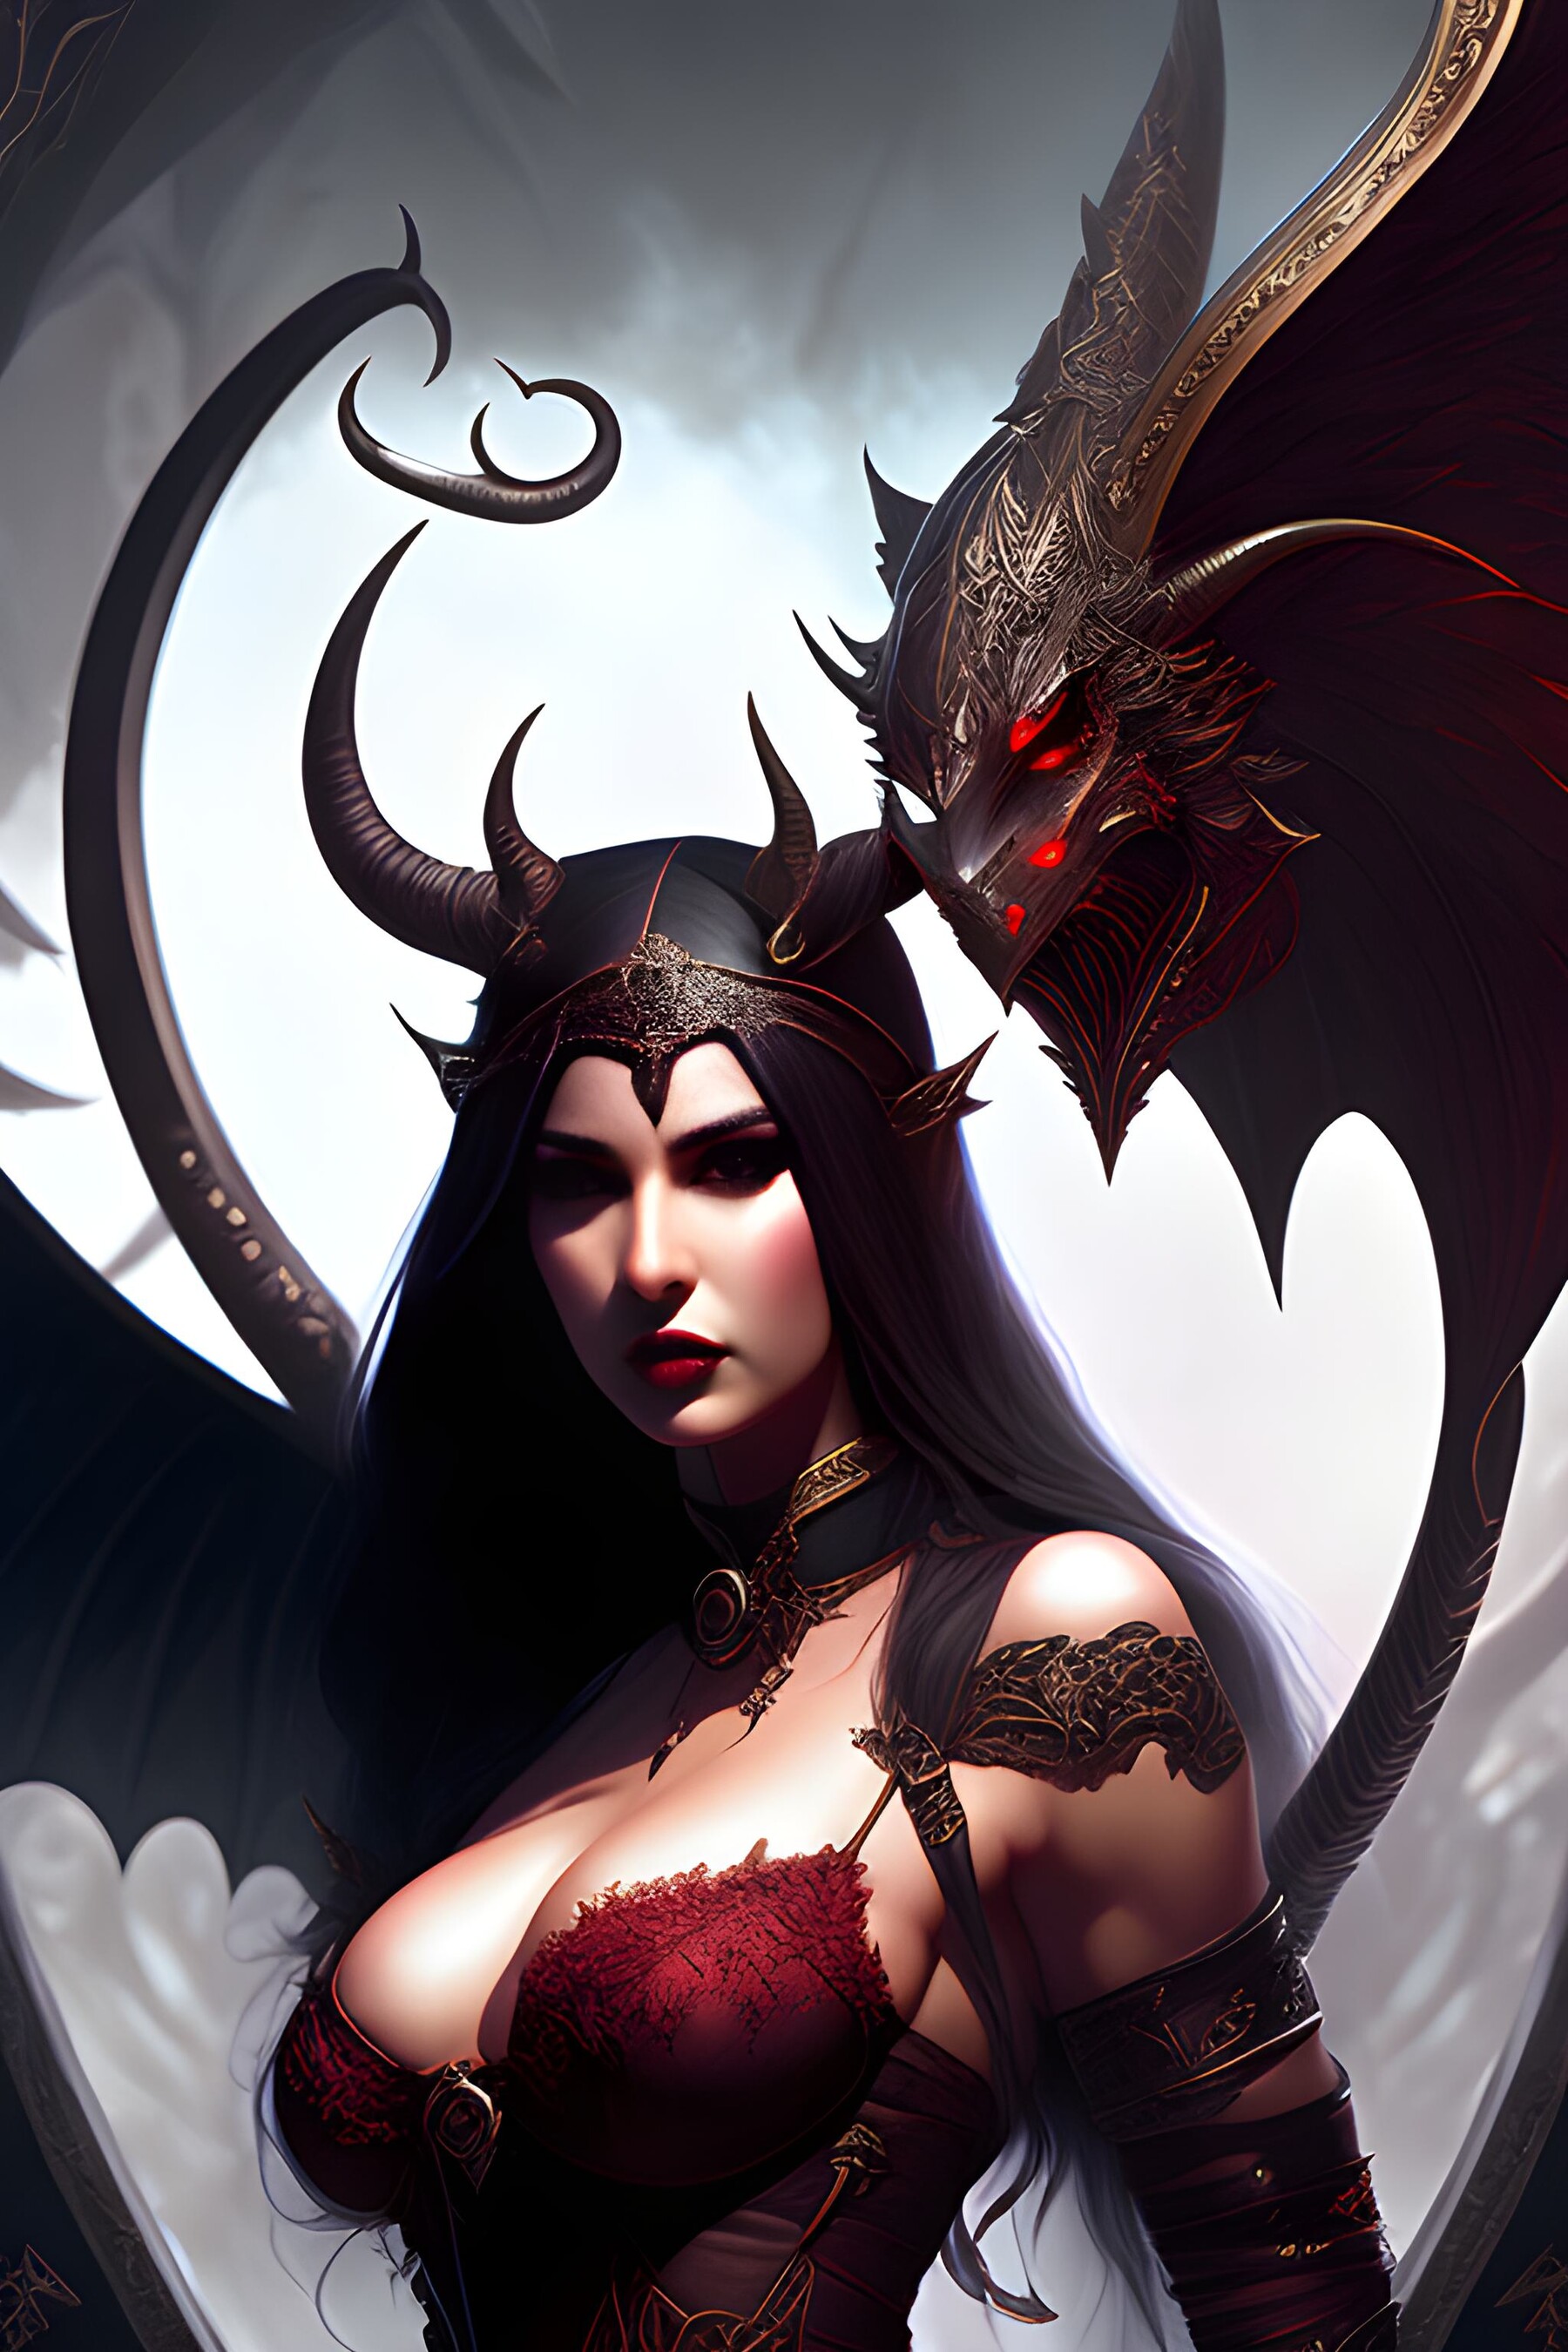 Artstation Sirens Succubi And Seductresses The Allure Of Mythical Women Artworks 2217